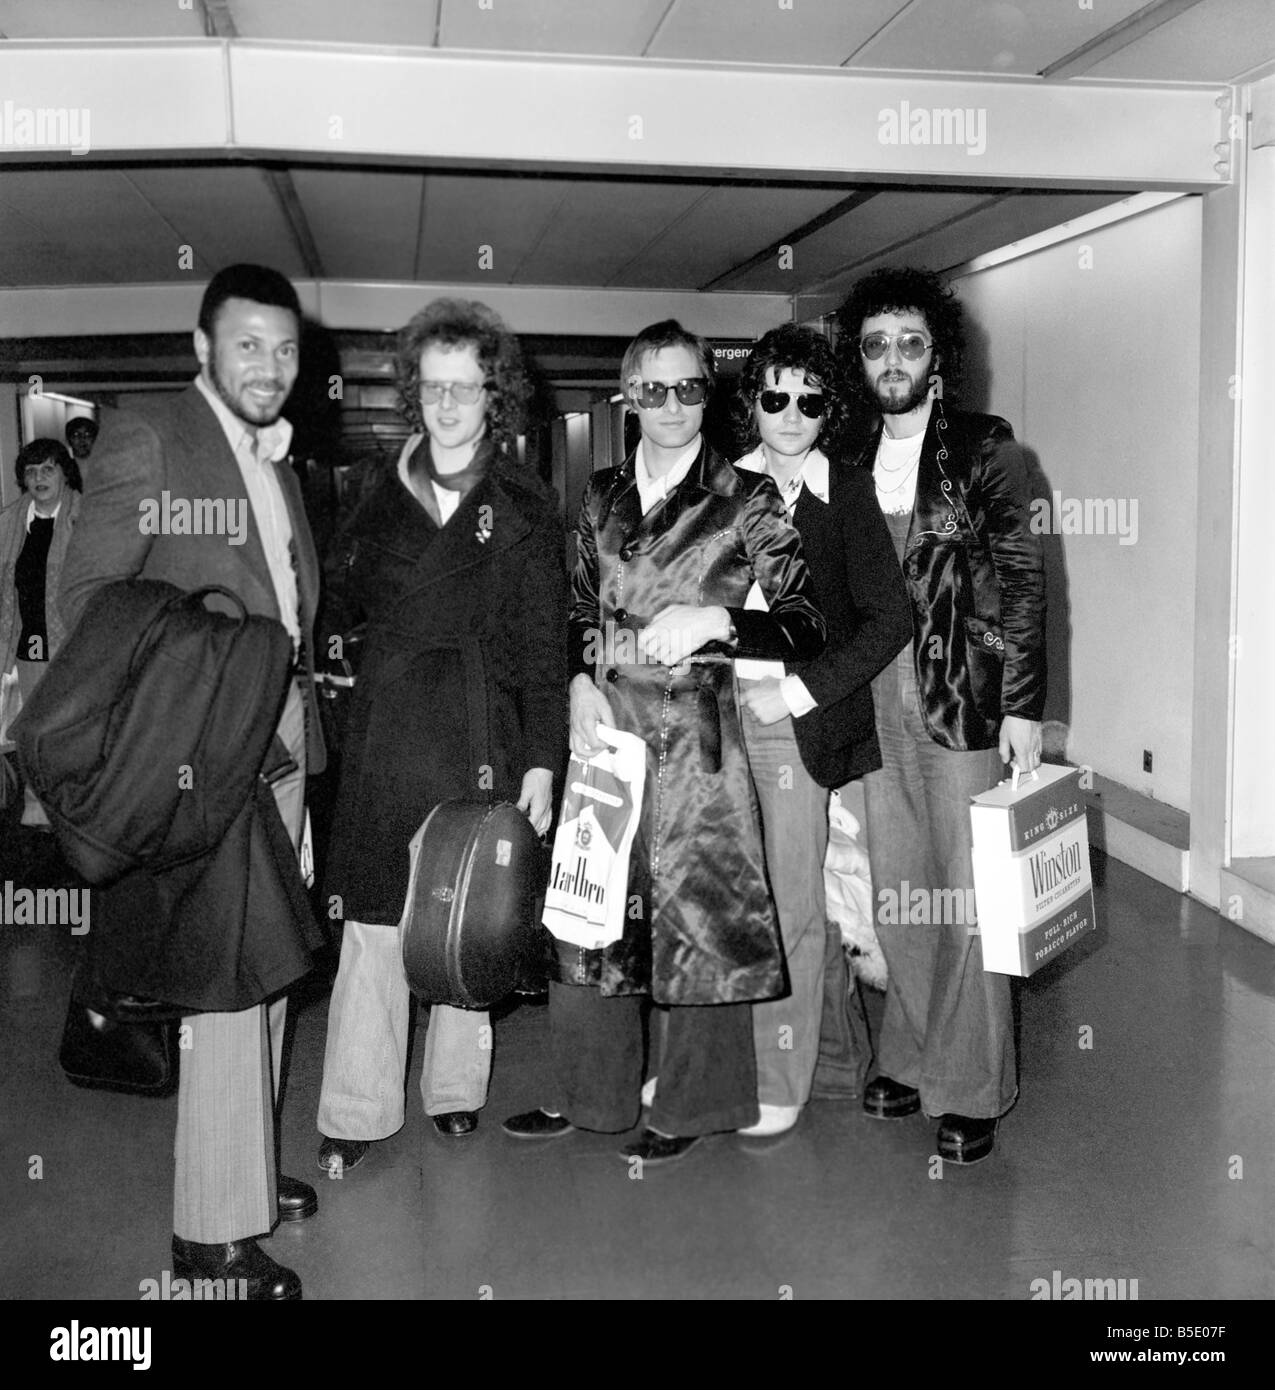 Steve Harley  (3rd left) and Cockney Rebel. Seen here at London Airport arriving back from New York. Stock Photo